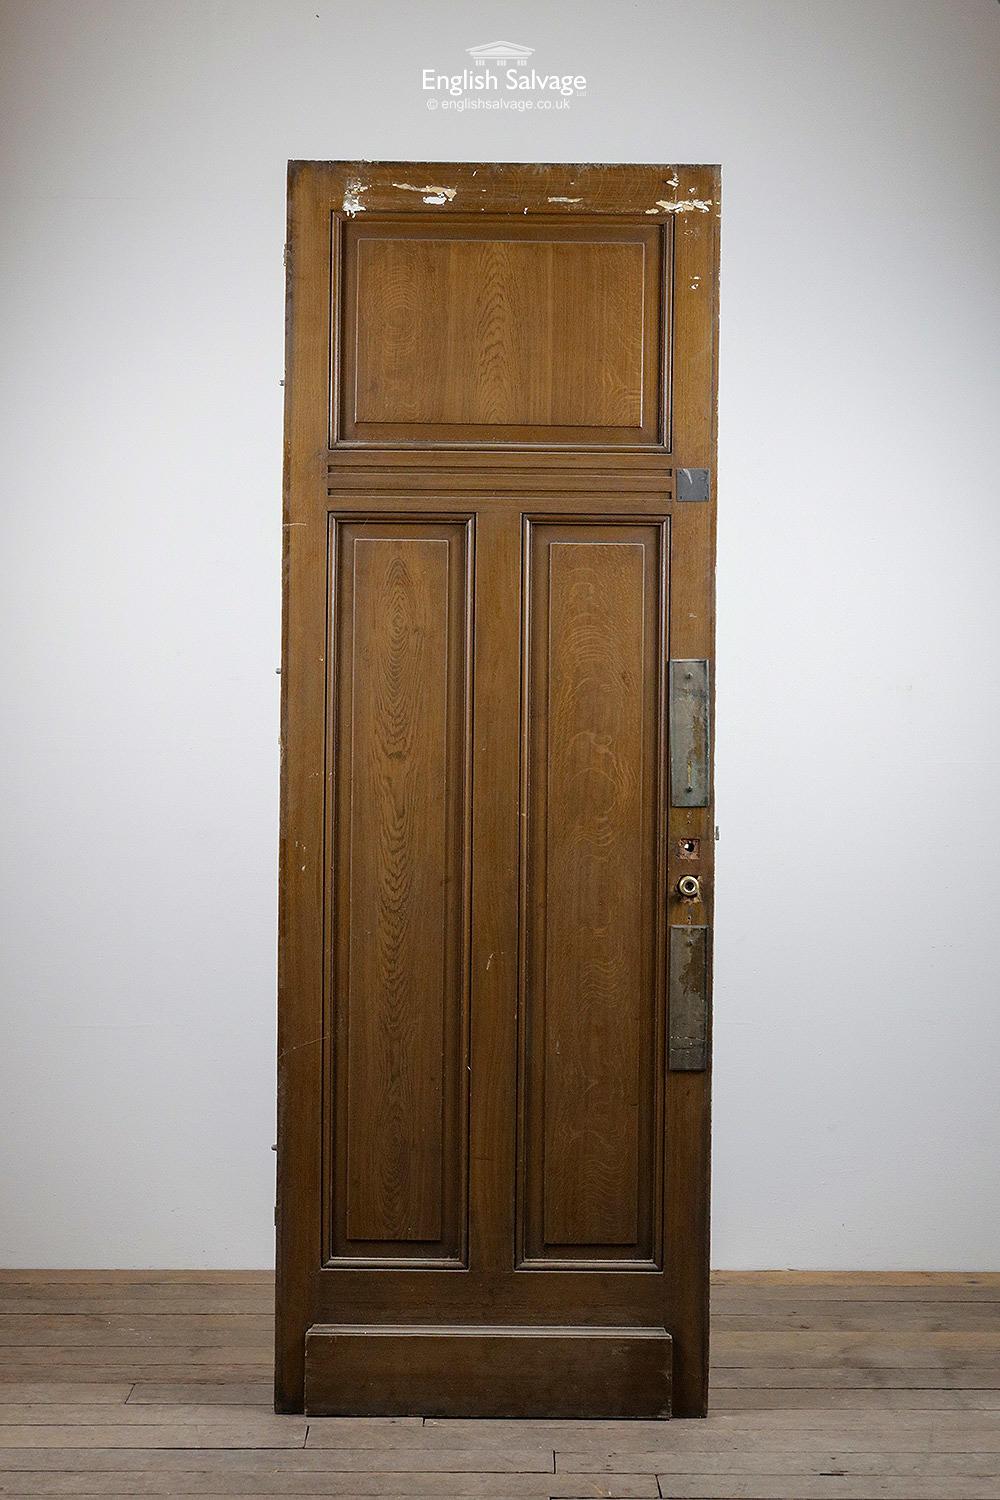 Salvaged three panel door from a property in France, one of several we have in stock. This one is painted cream one side with an oak veneer stain to the other side. Three hinges, push plates, old lock and fitting remain. Some scuffs and marks as